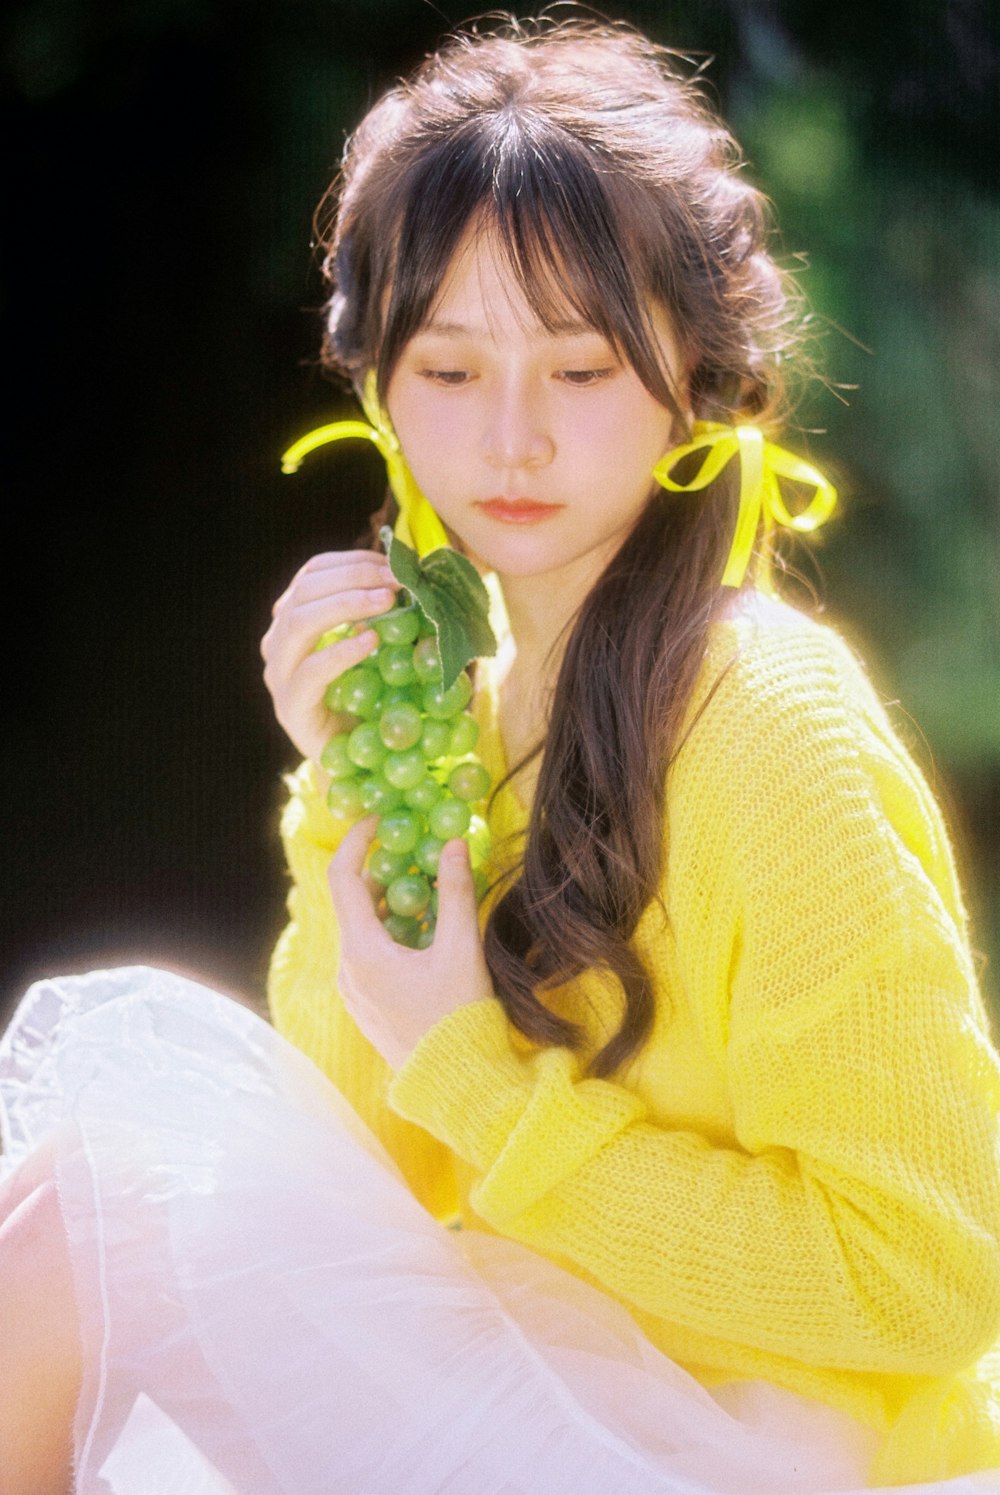 a woman in a yellow sweater holding a bunch of grapes